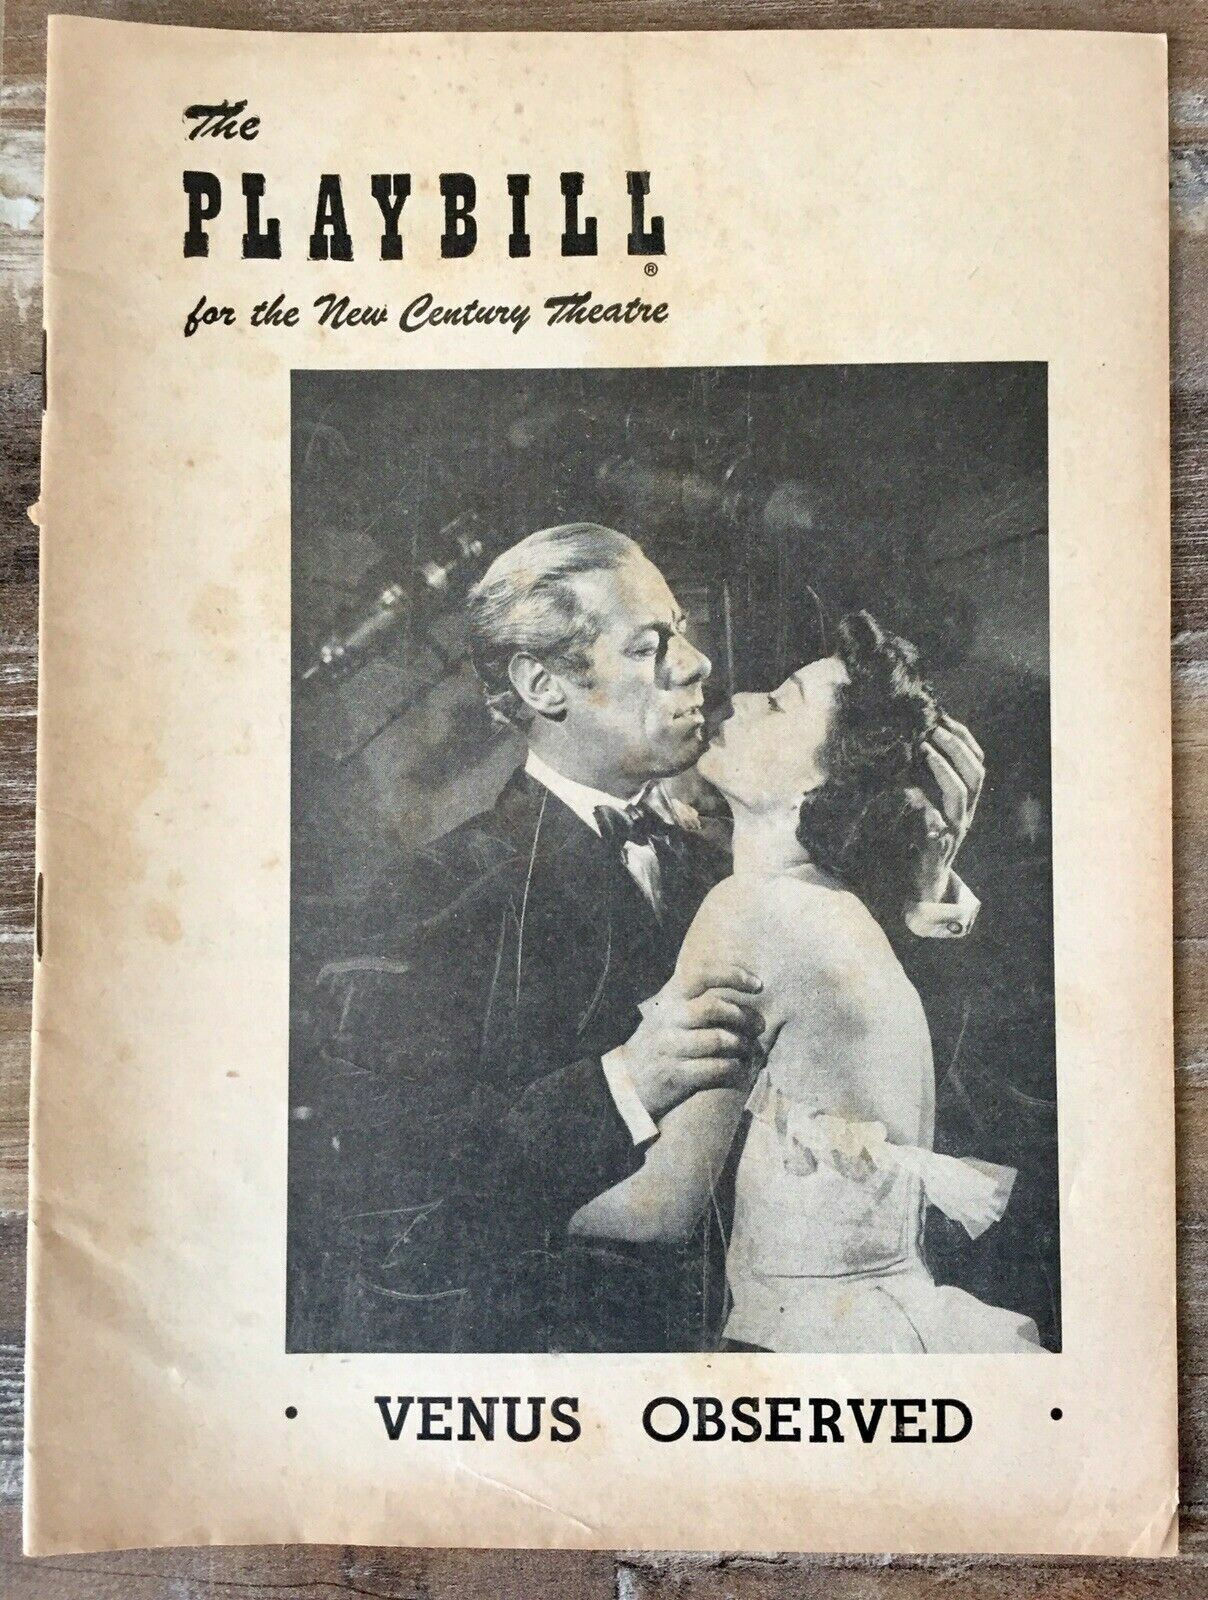 LOT OF SIX VINTAGE EARLY 1950'S PLAYBILL - VERY GOOD CONDITION - MANY RARE Без бренда - фотография #7